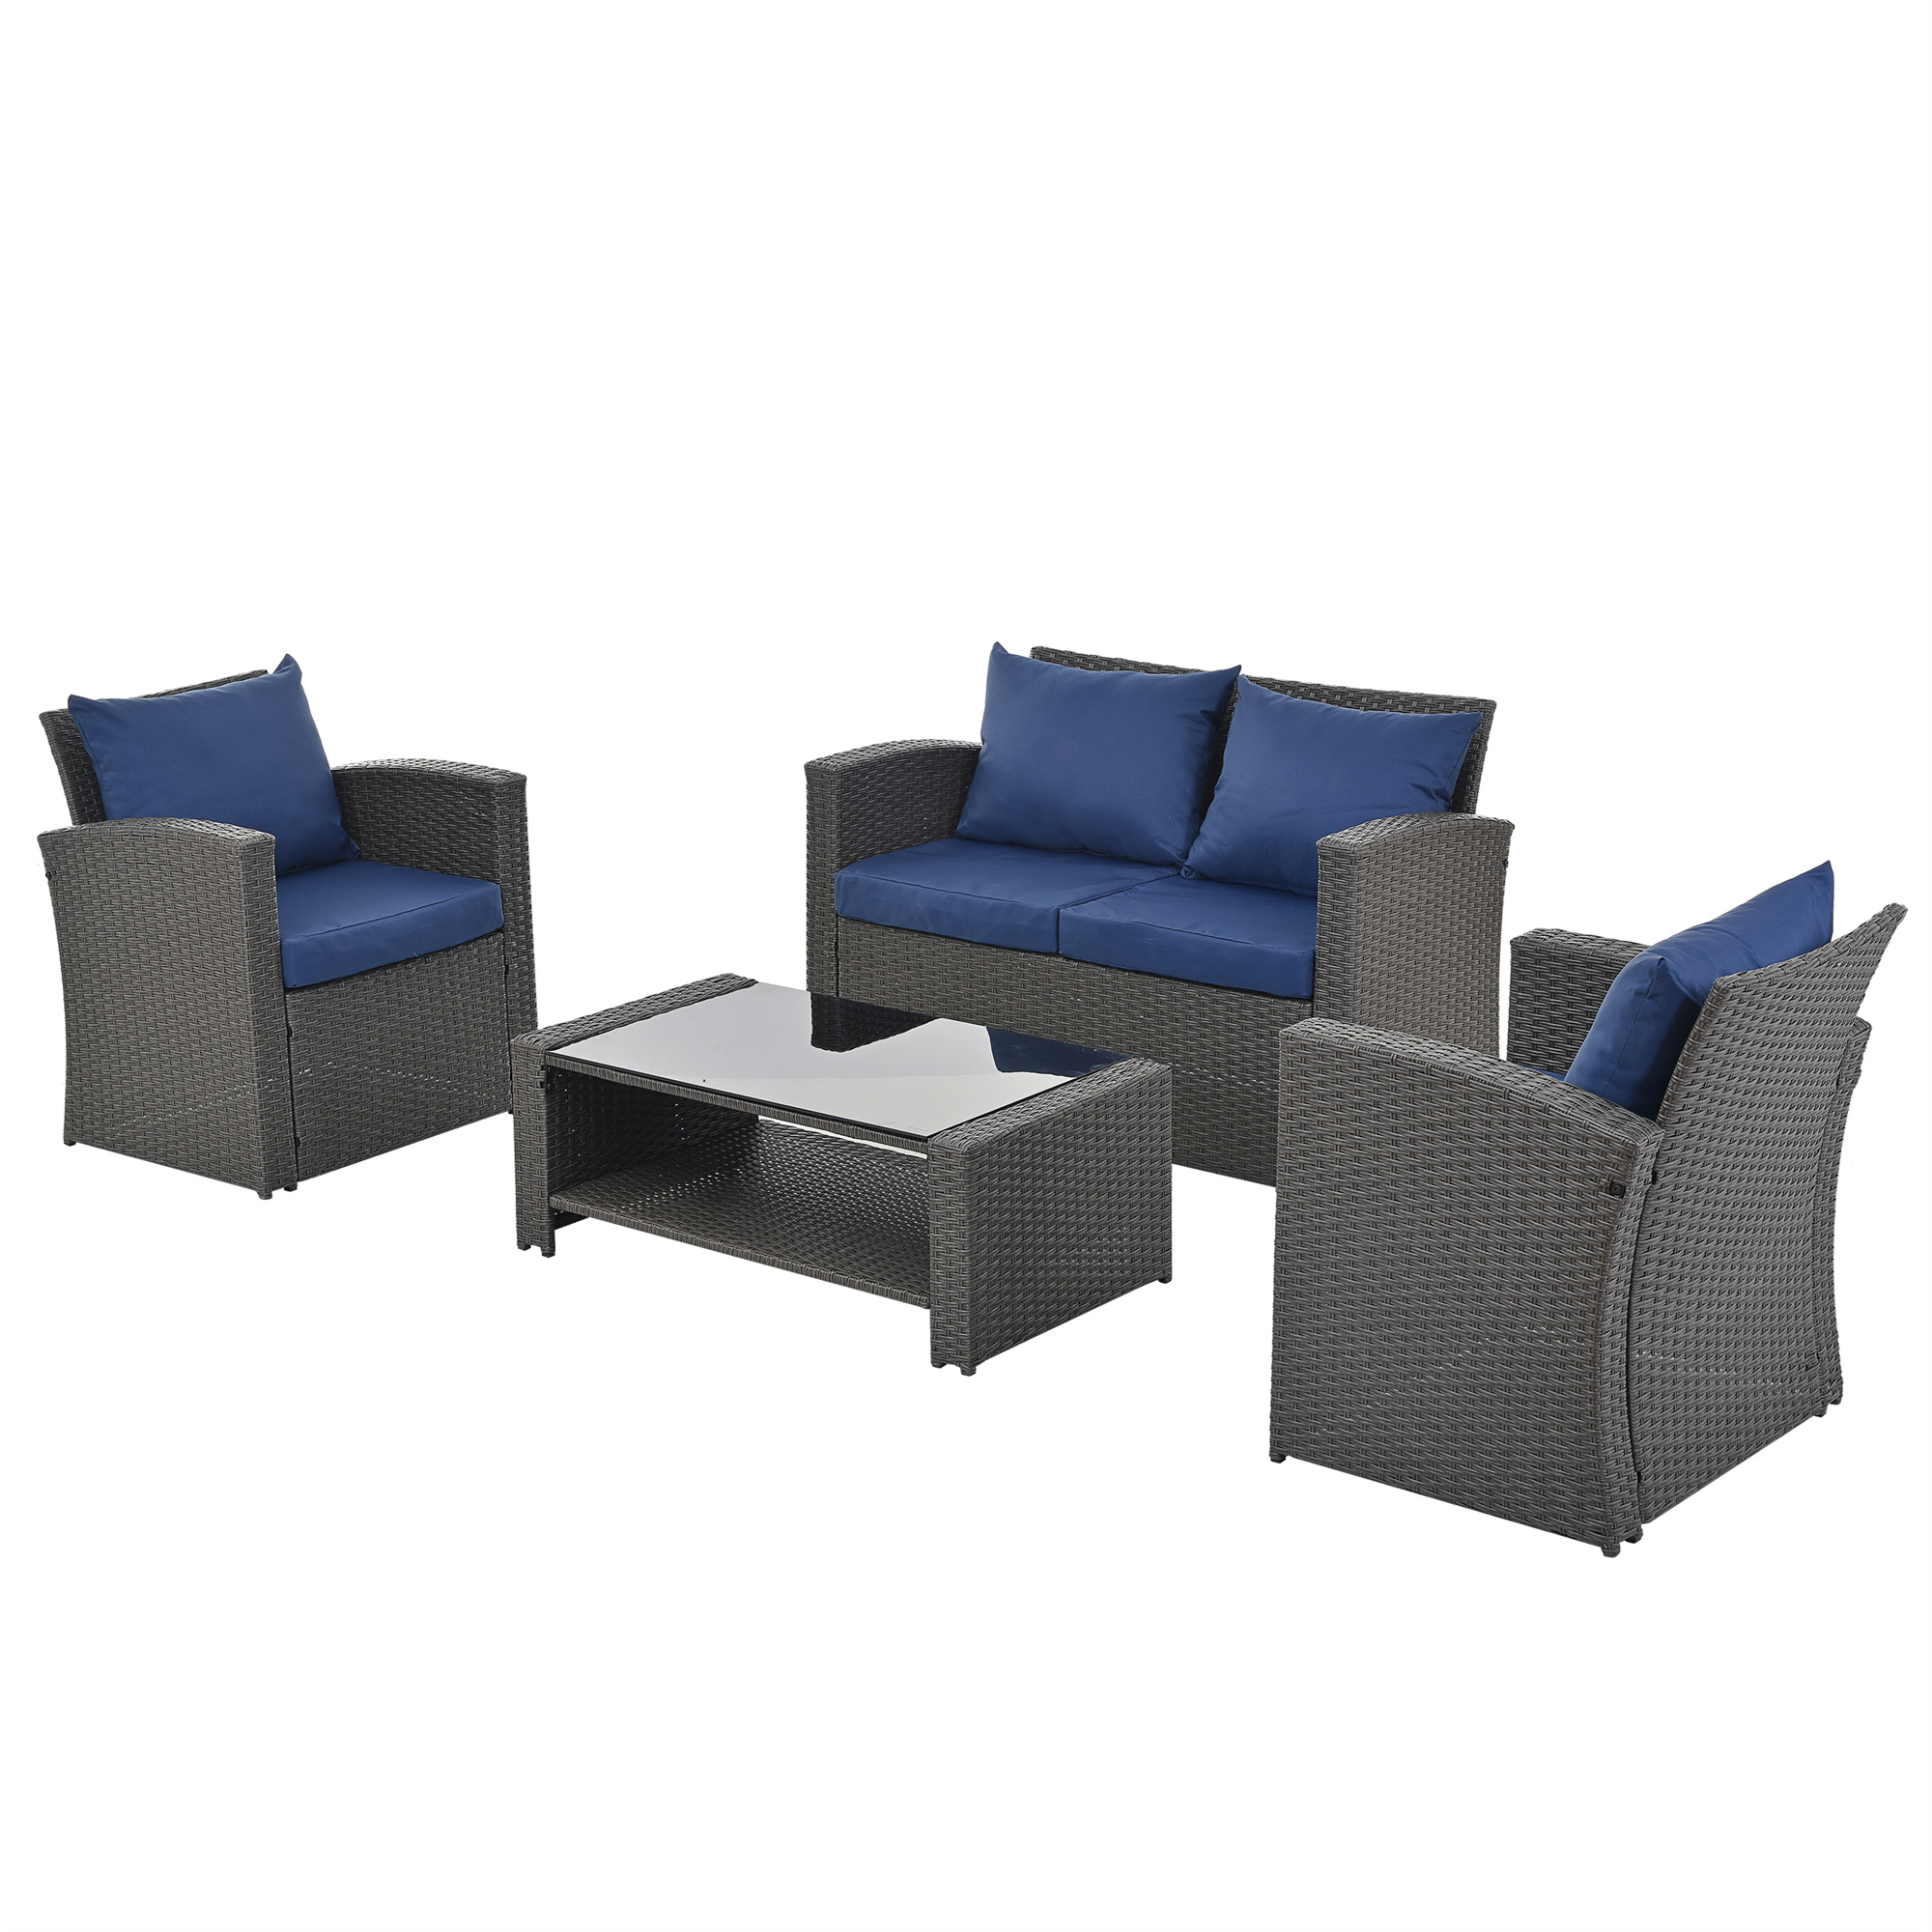 4 Piece Patio Furniture Set, Outdoor Conversation Set Acacia Solid Wood Outdoor Sofa Set for Poolside Garden, Grey Cushions - image 4 of 7